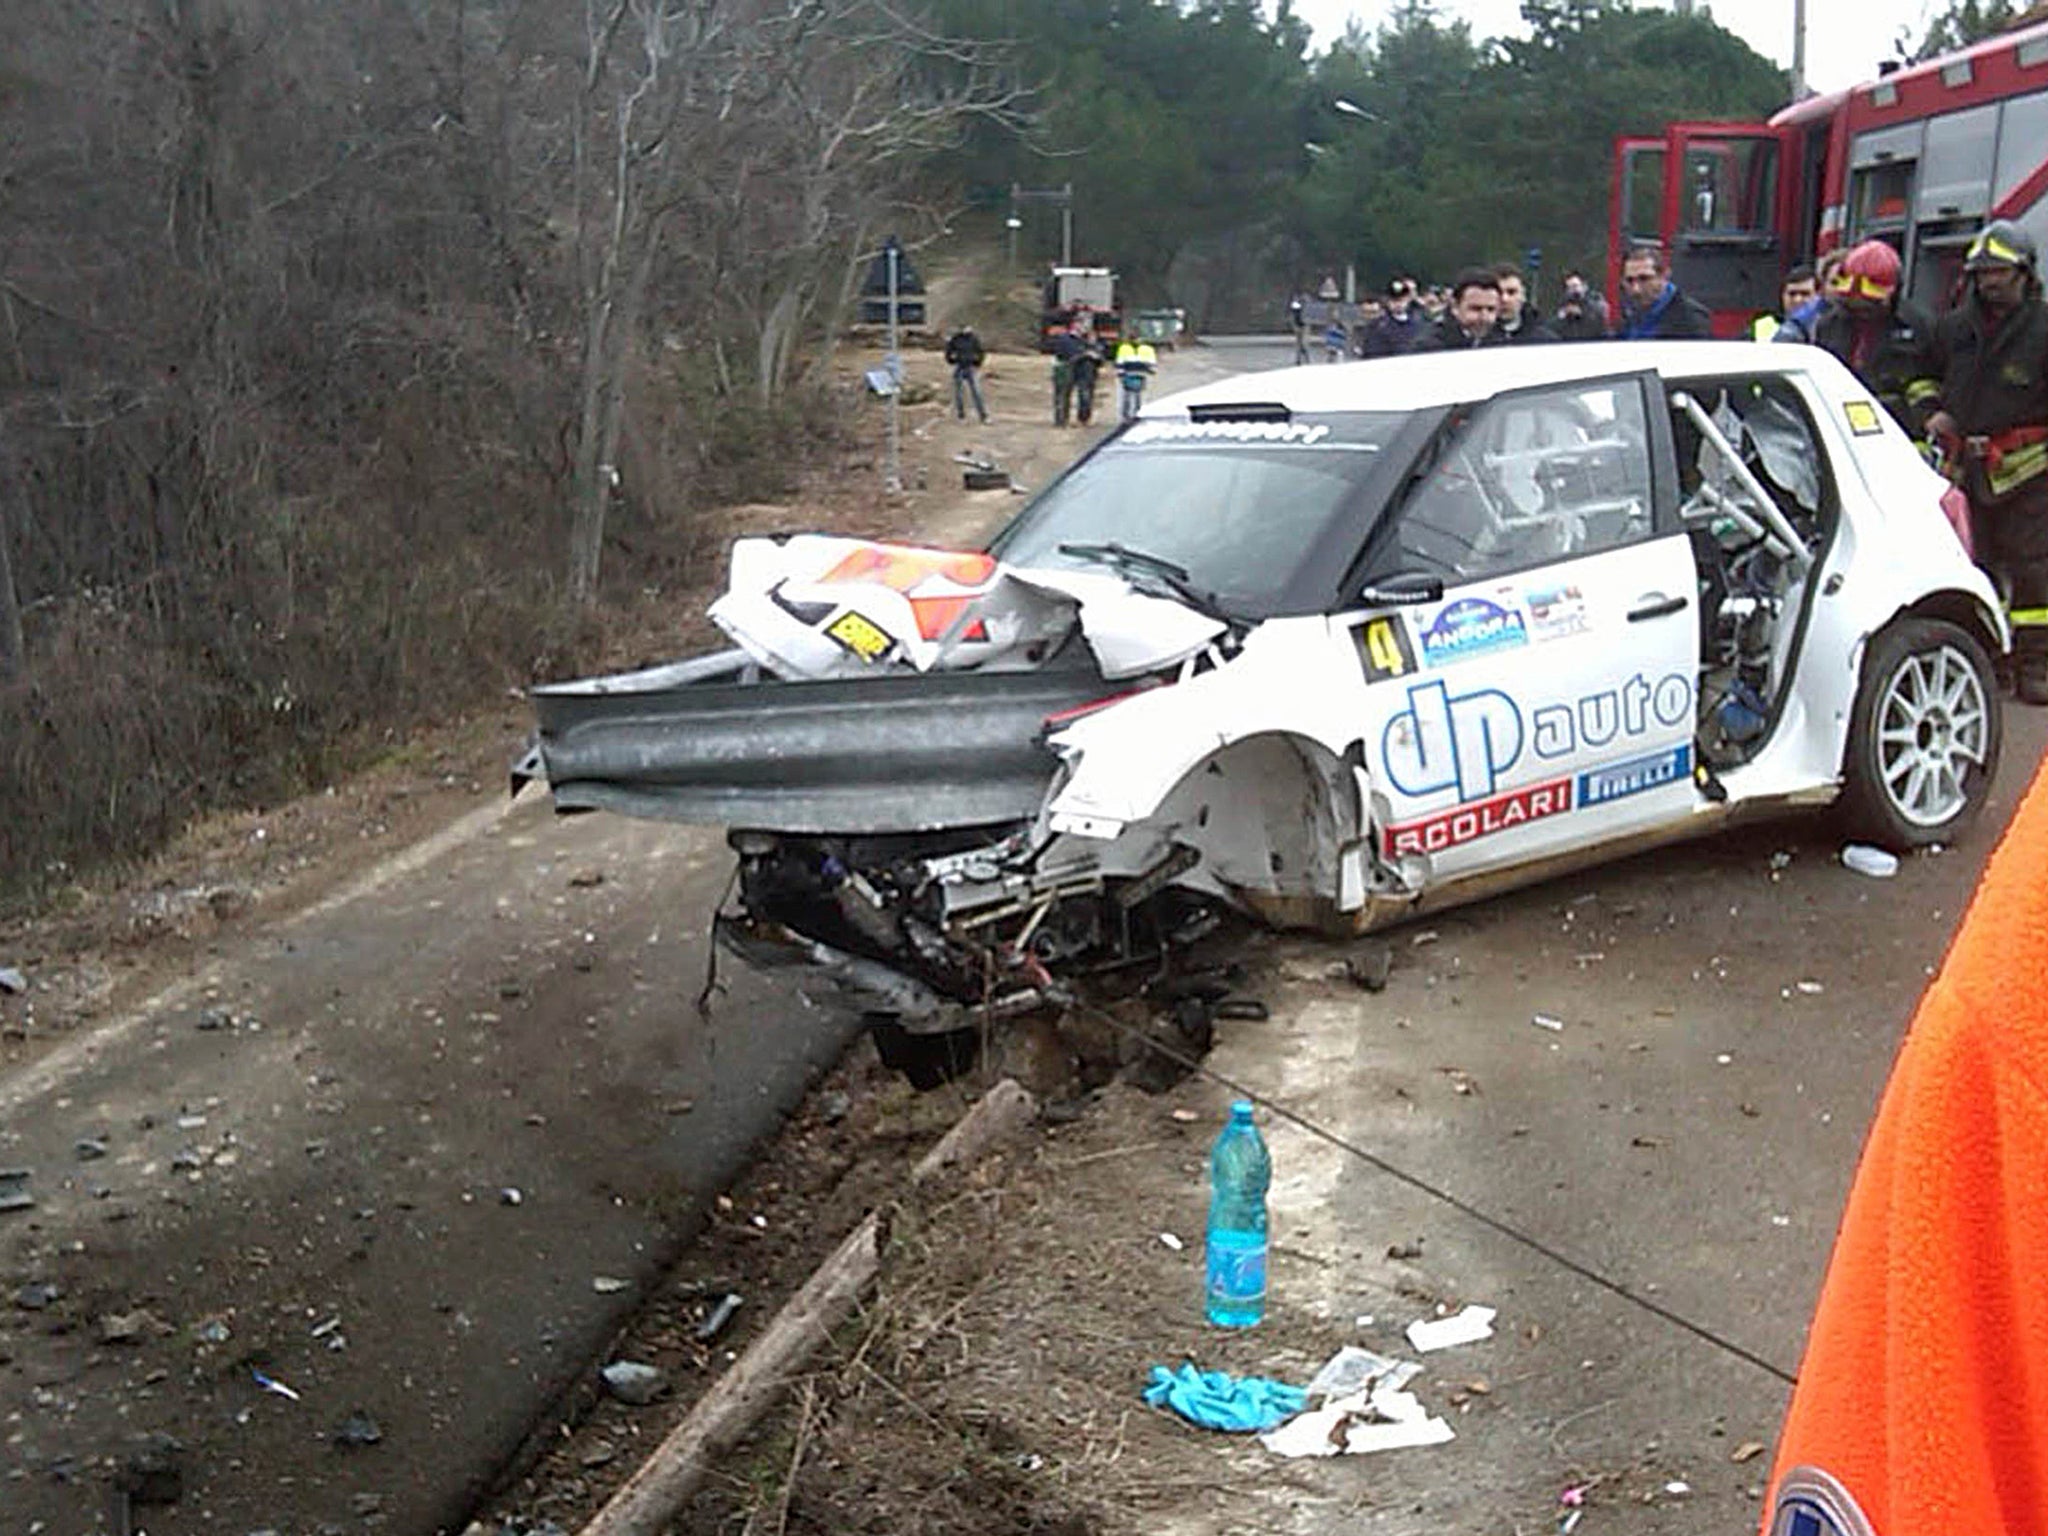 Kubica suffered career-altering injuries in a 2011 rally crash in Italy